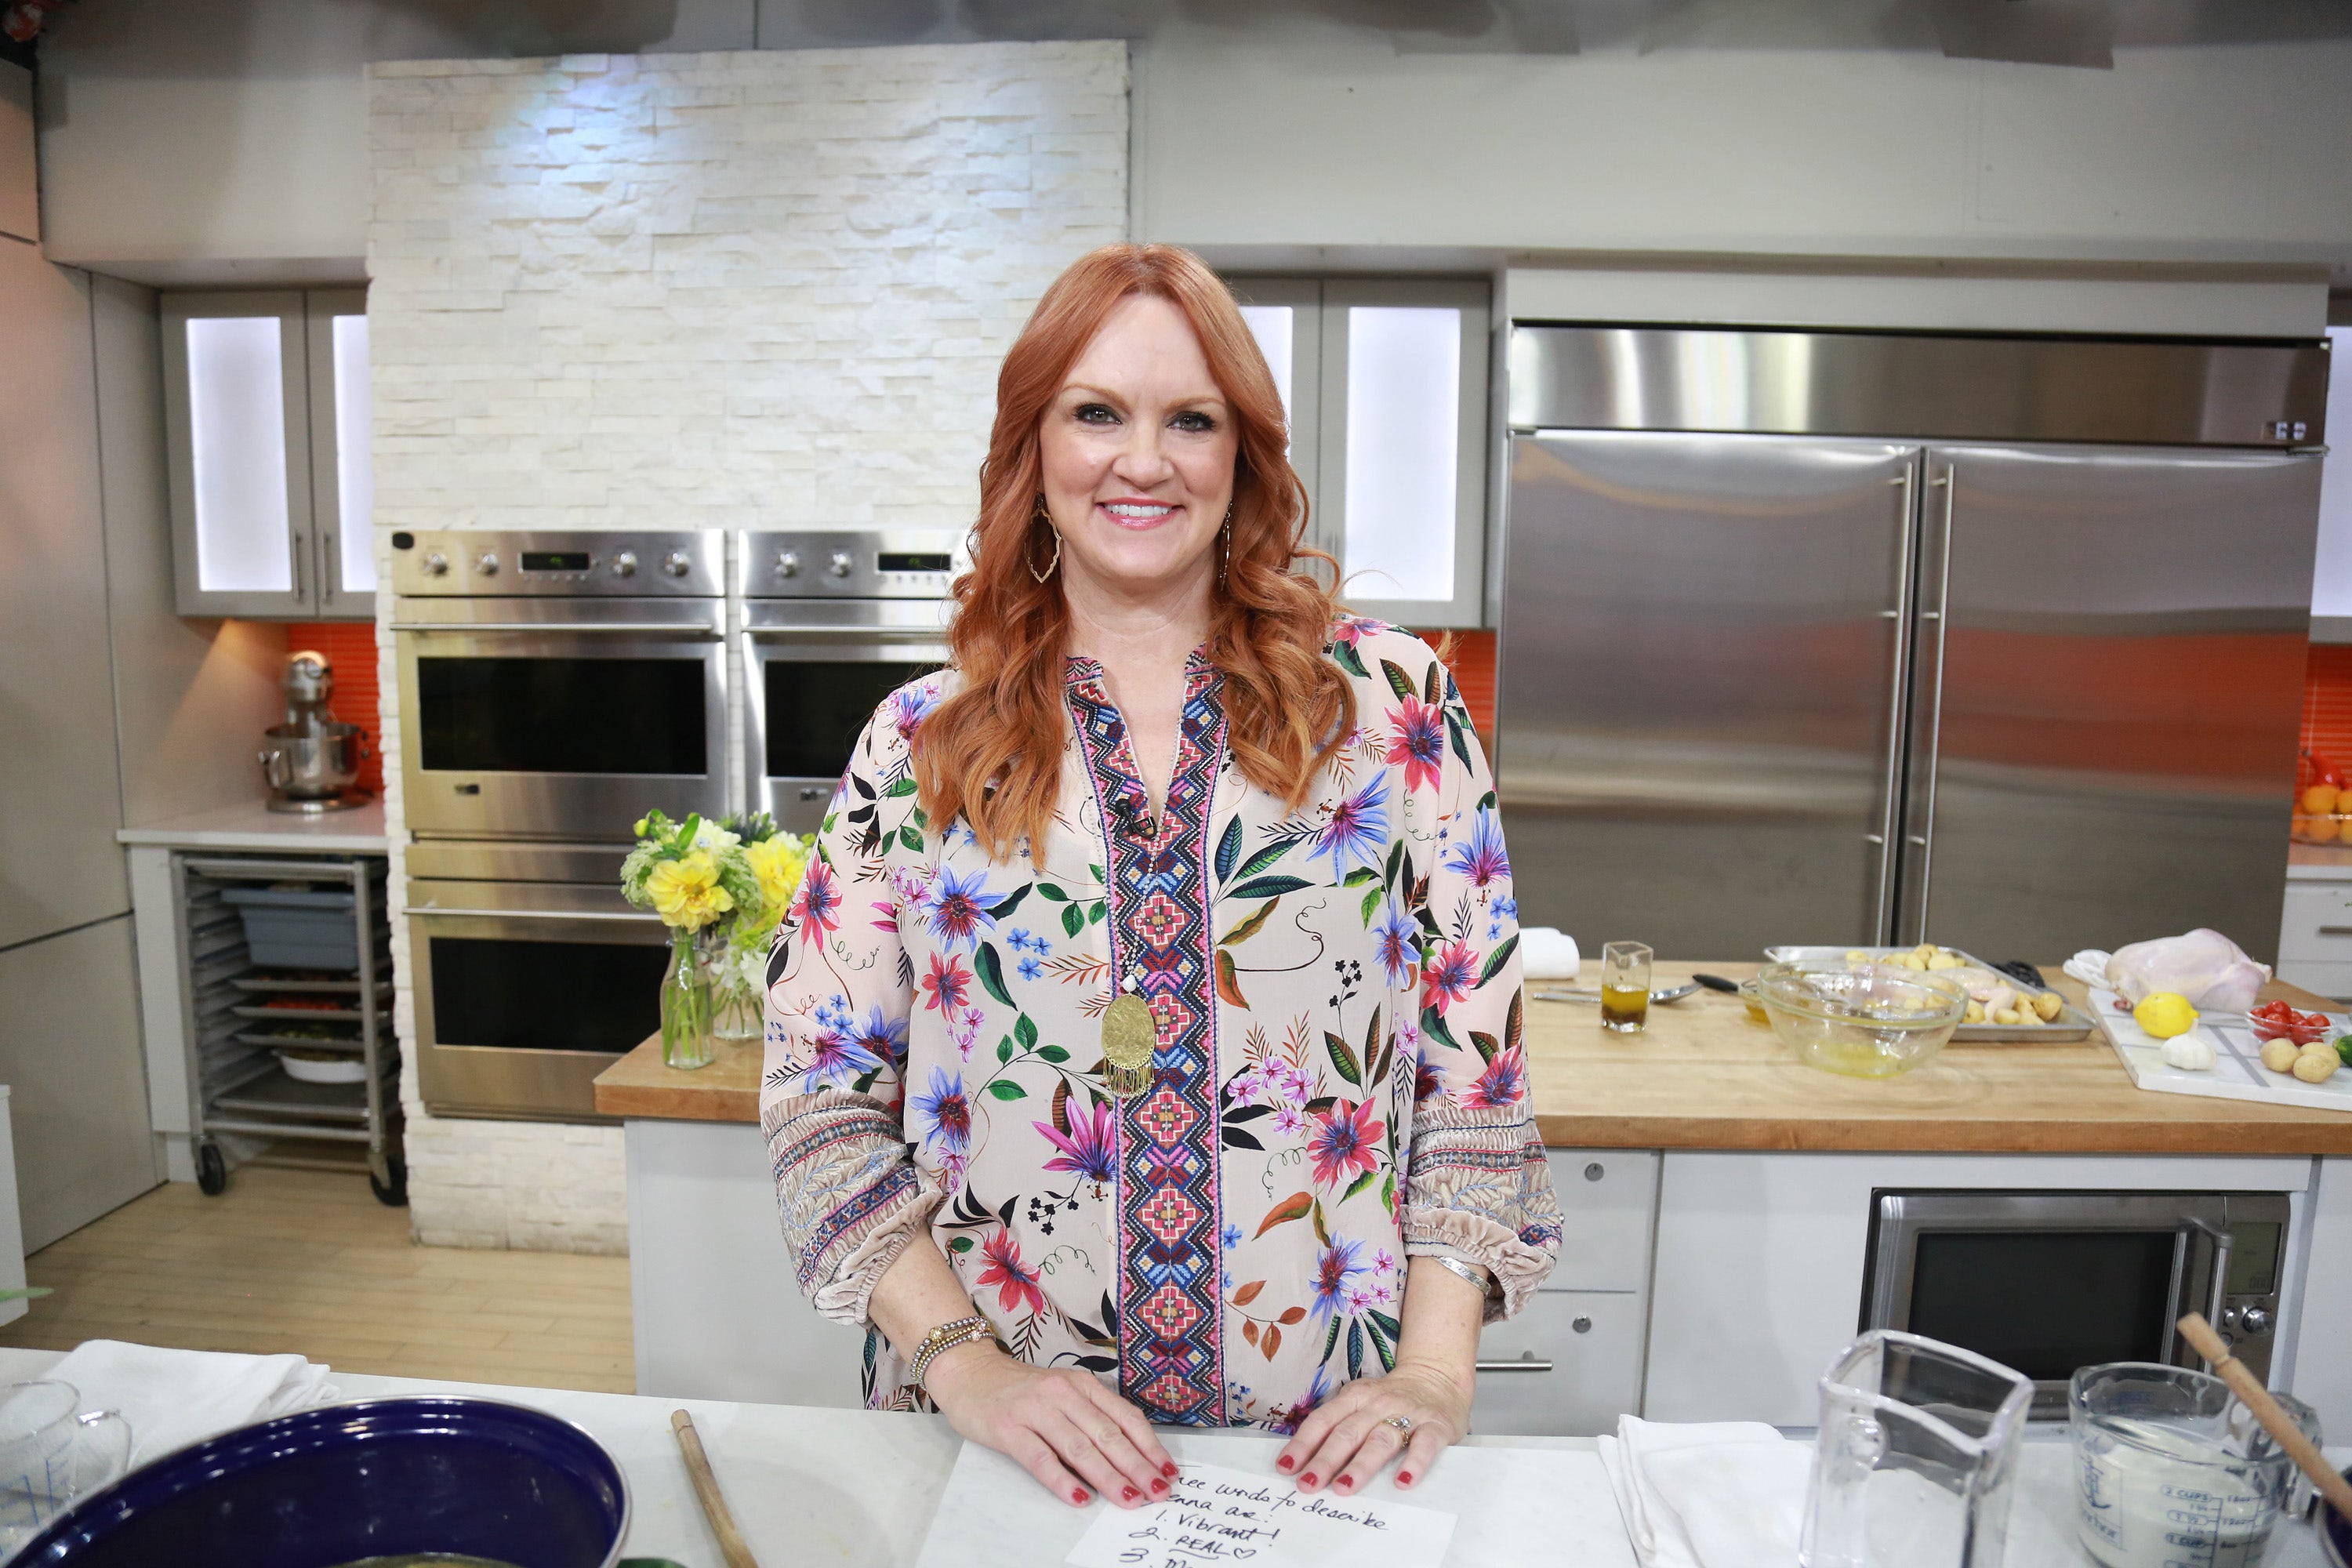 Pioneer Woman Ree Drummond shares tips for maintaining 50-pound